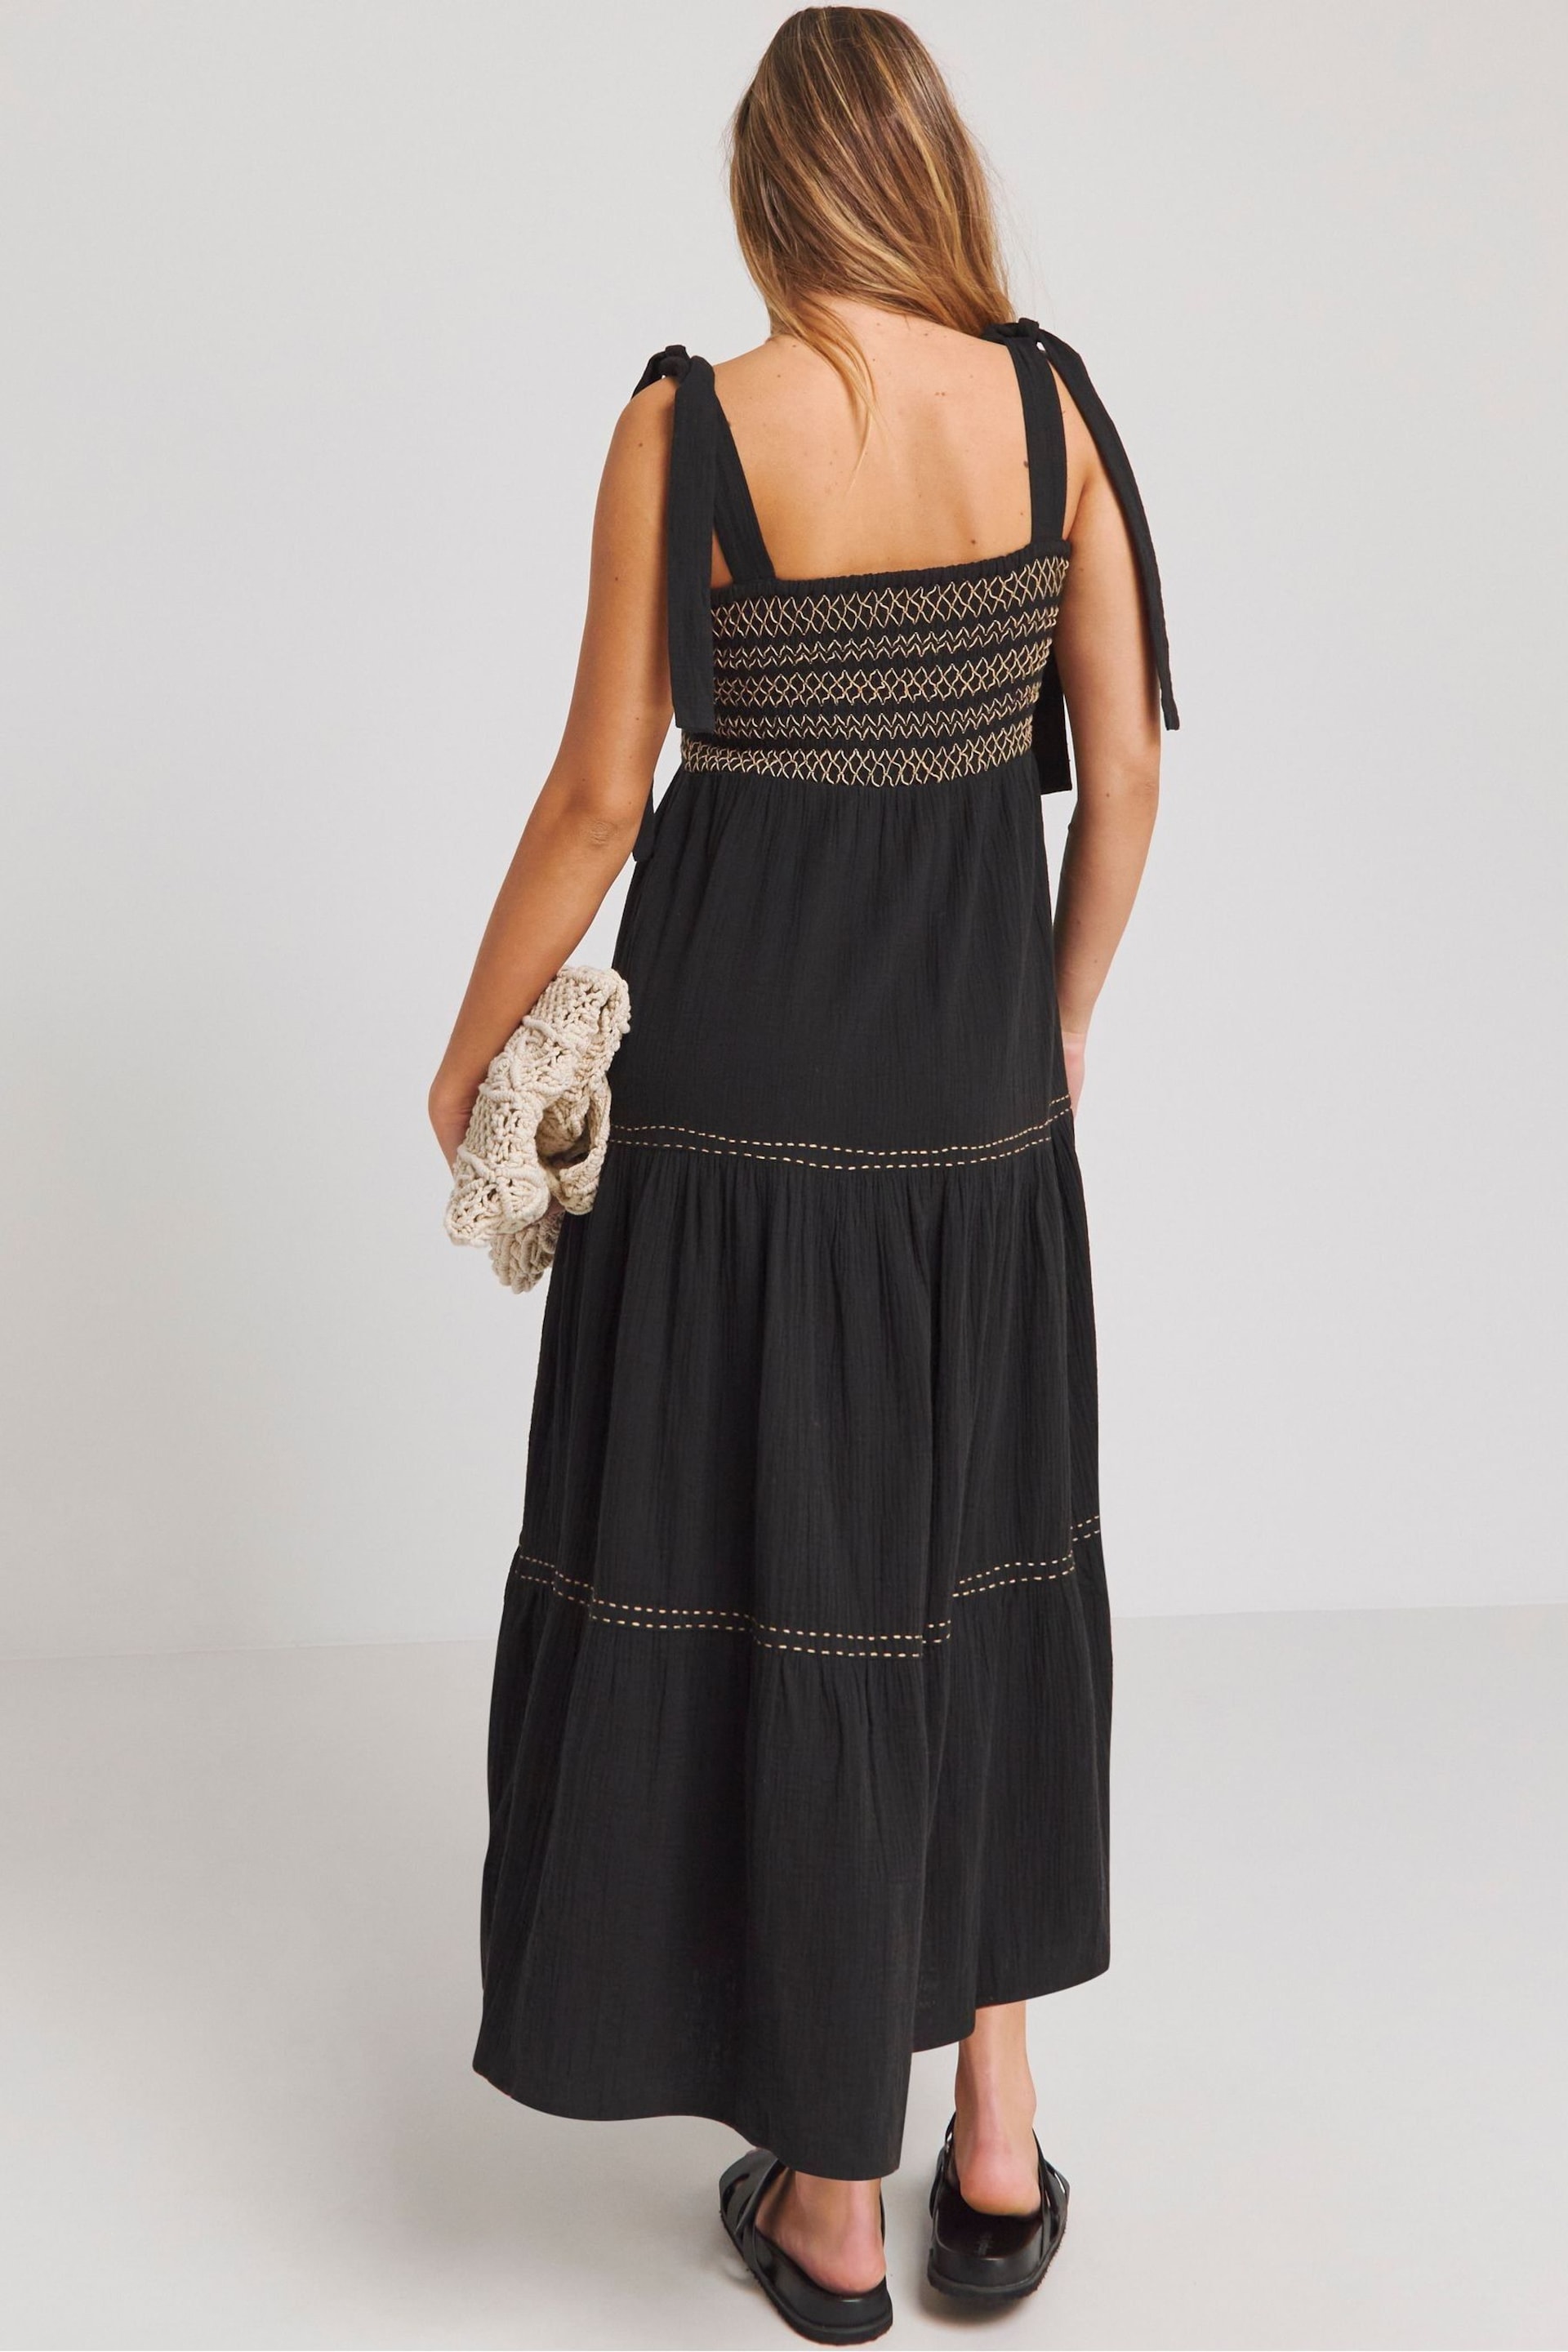 Simply Be Black Embroidered Tiered Maxi Dress - Image 2 of 4